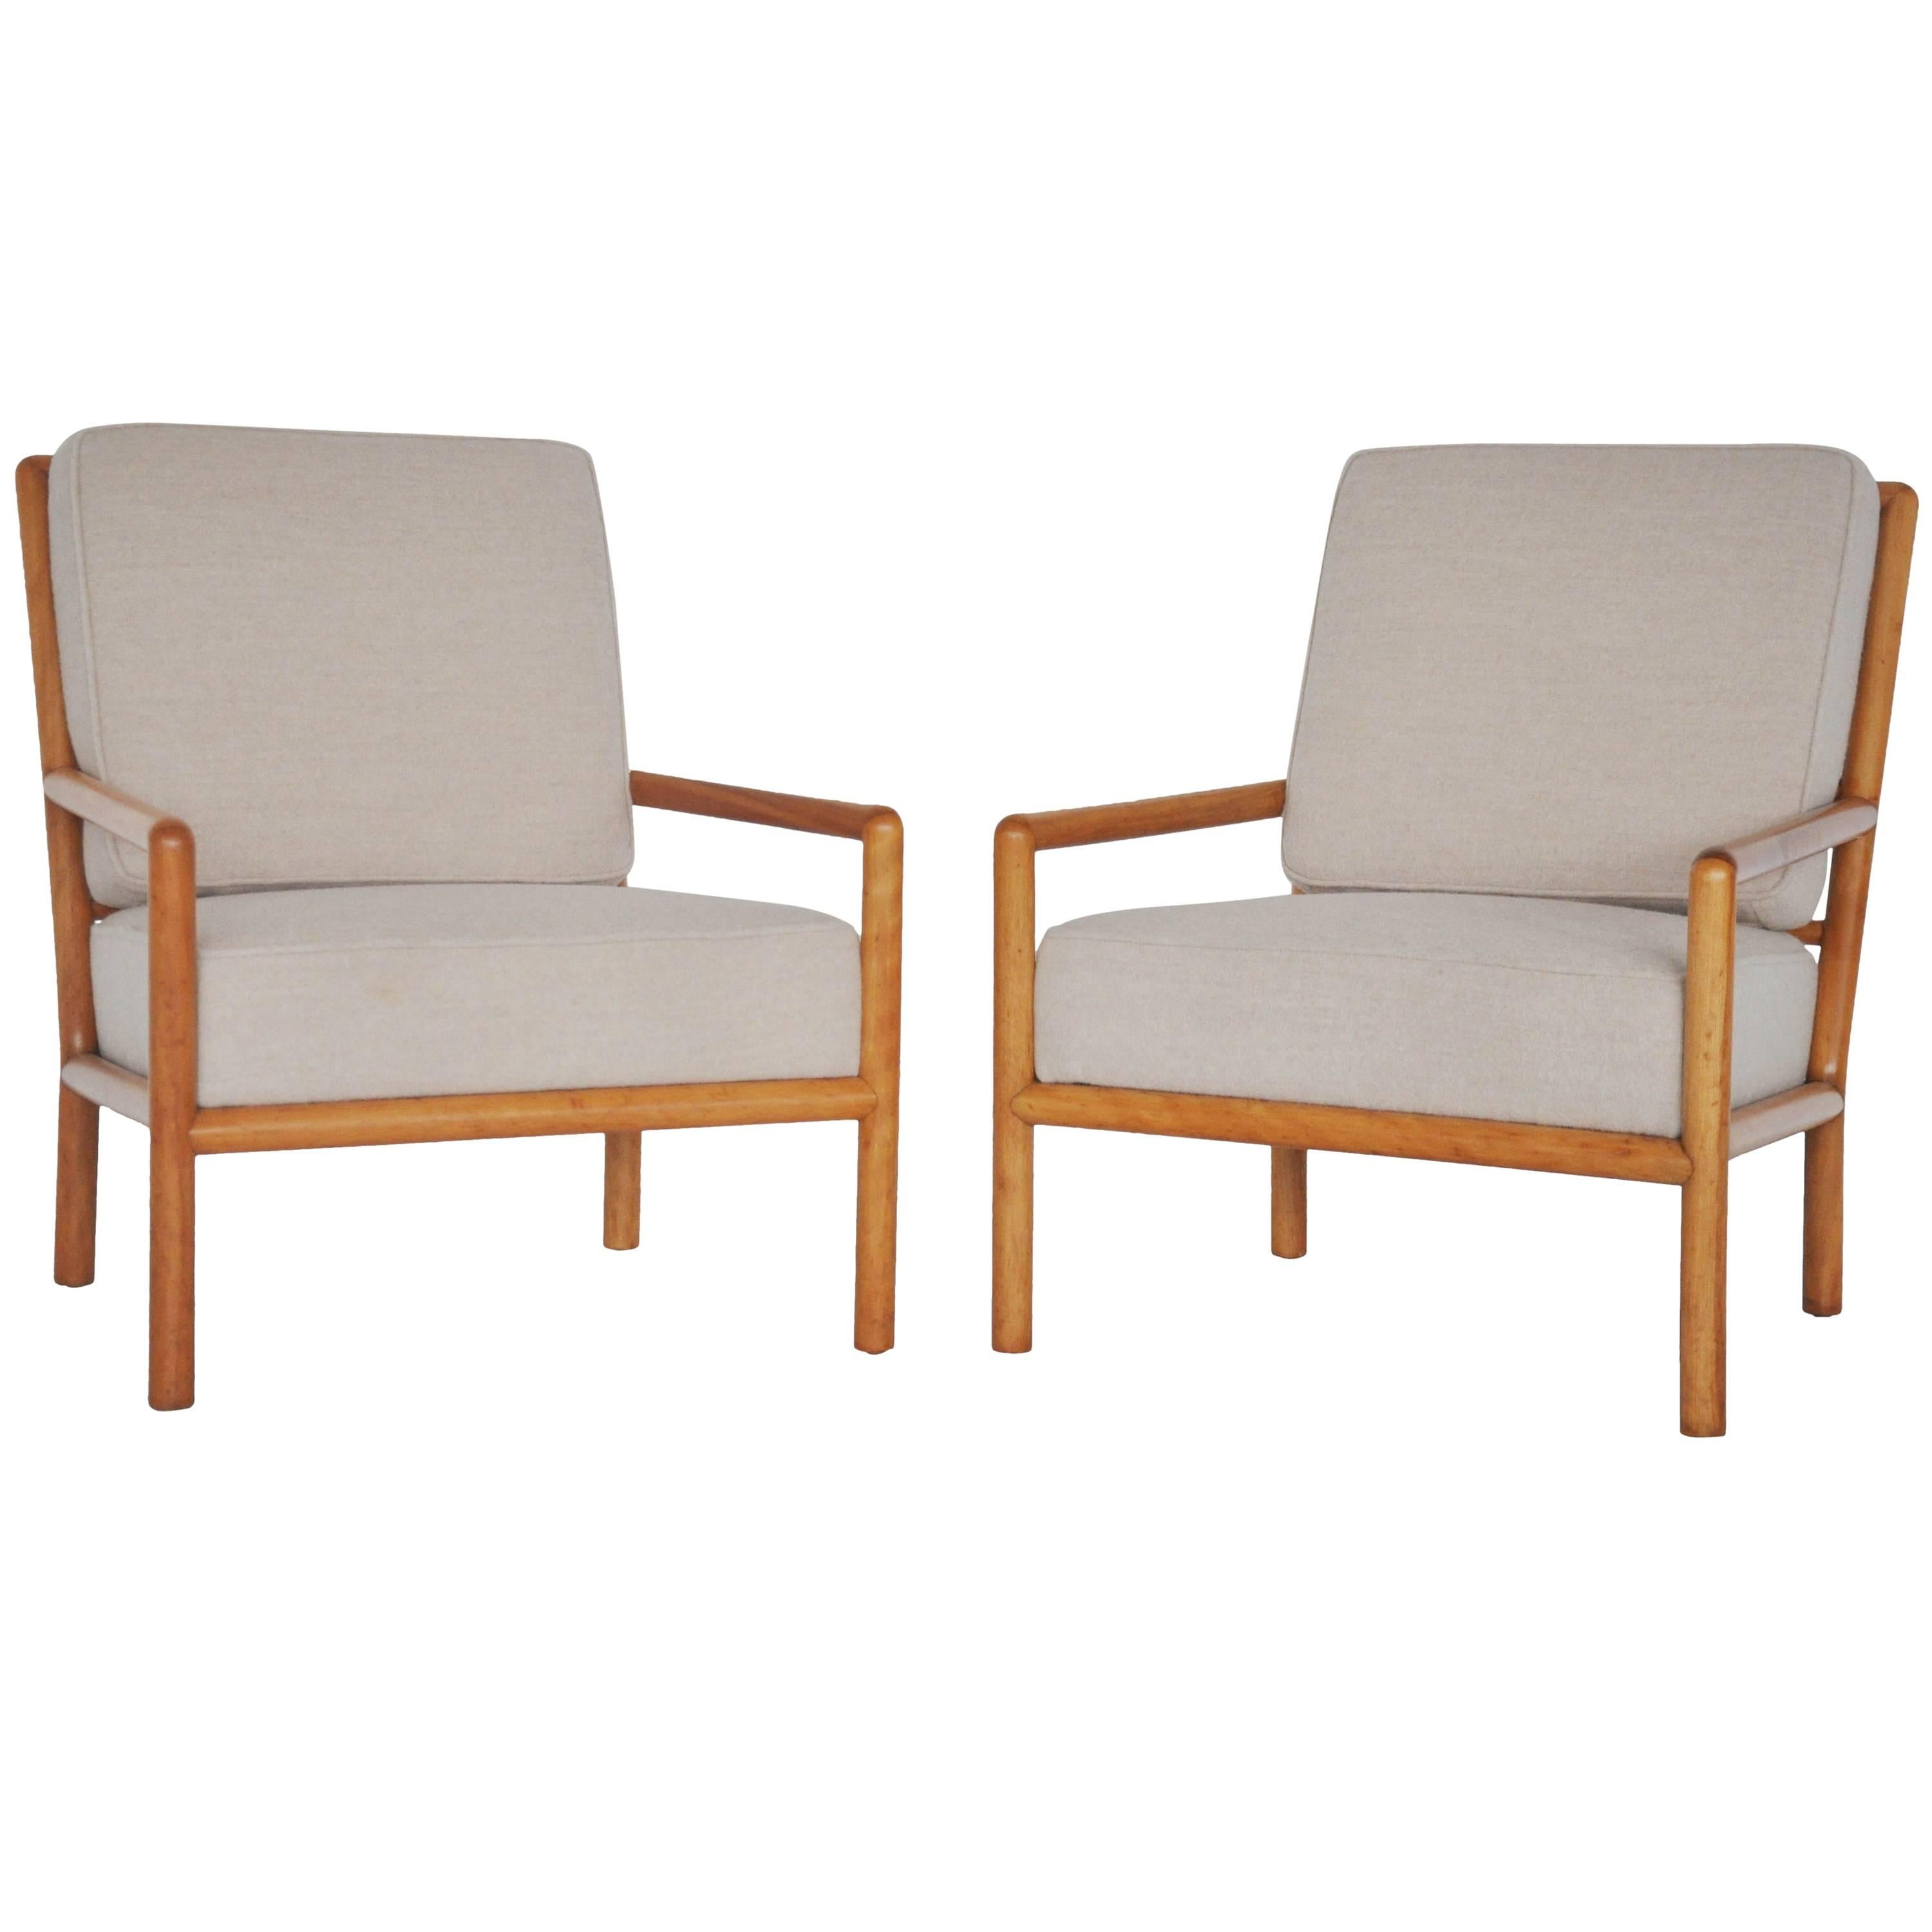 Pair of lounge chairs by T.H. Robsjohn-Gibbings, circa 1950s. Fully restored and reupholstered in soft wool fabric.